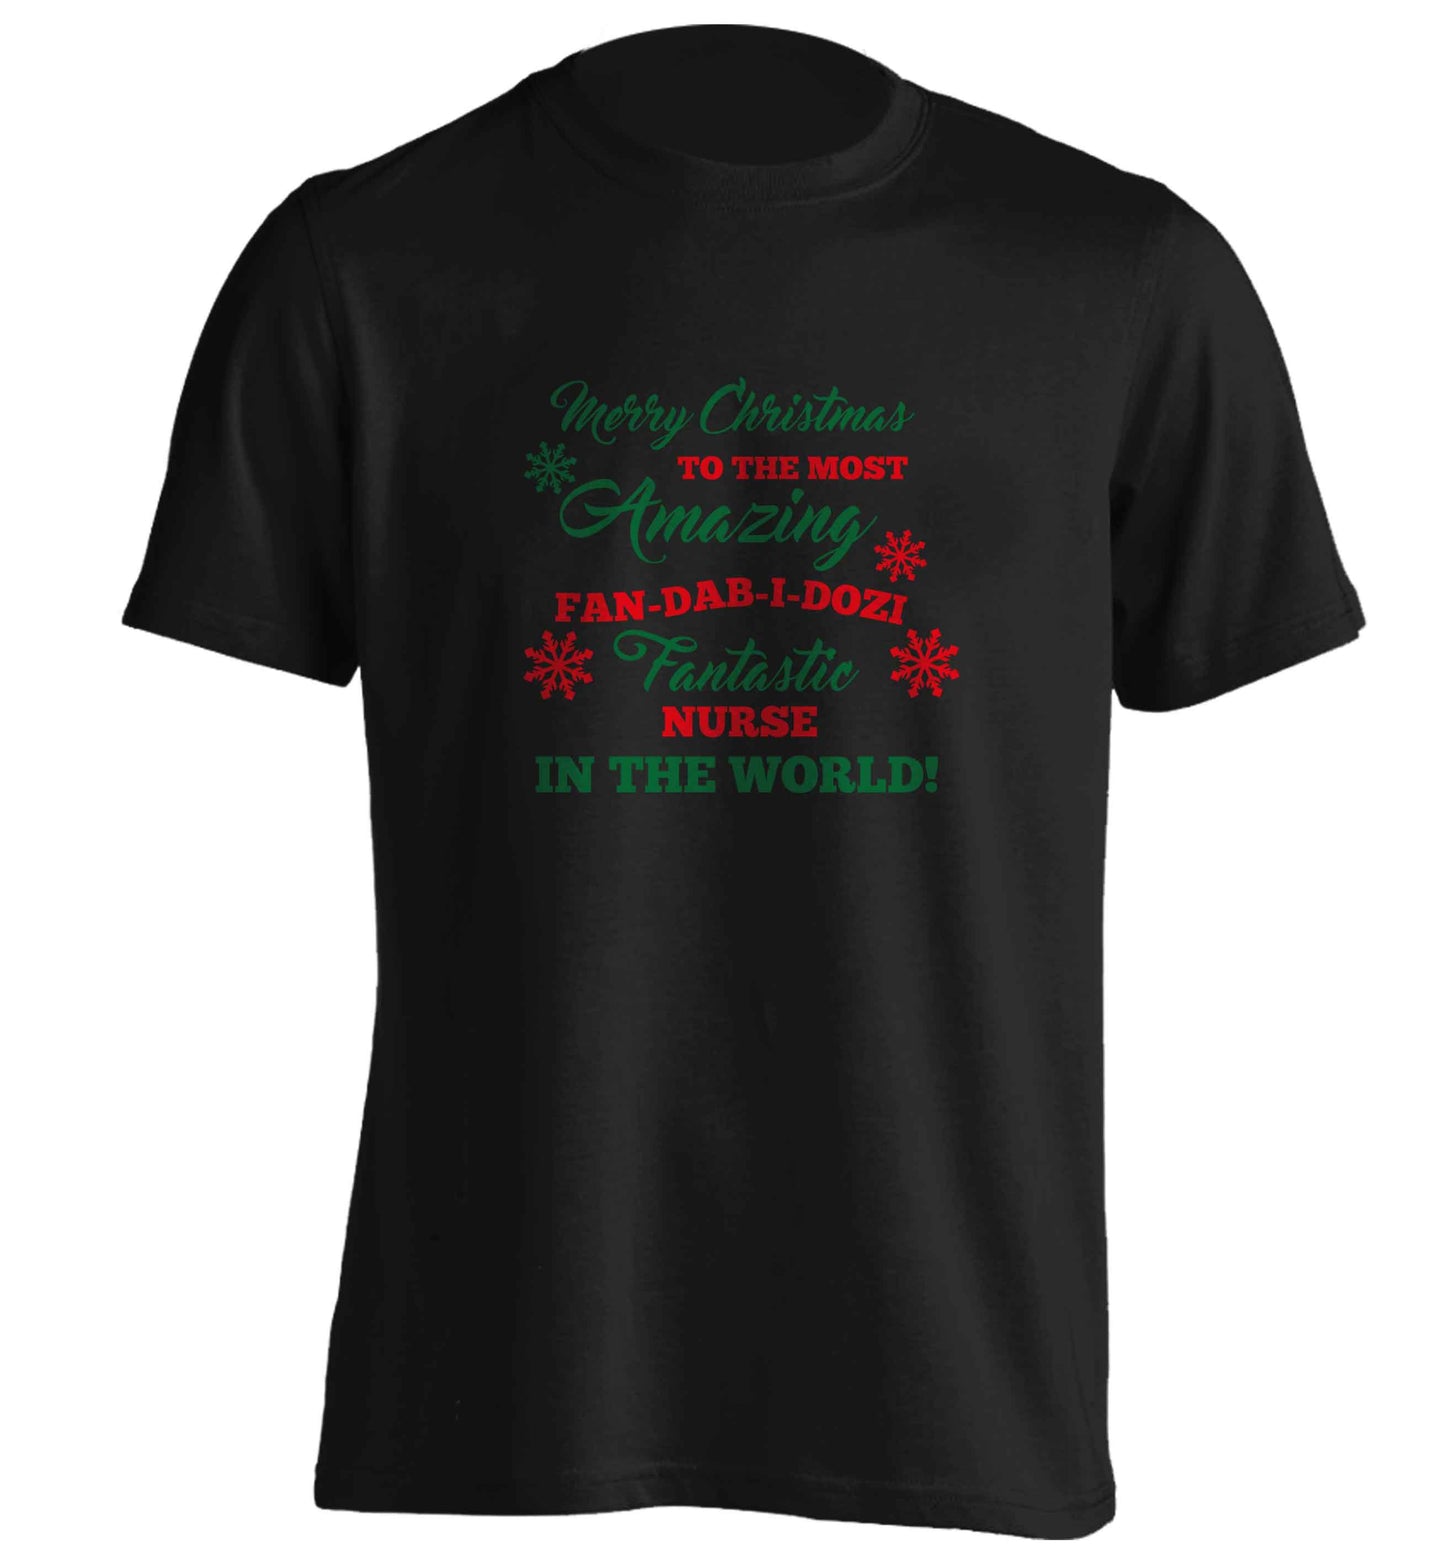 Merry Christmas to the most amazing nurse in the world! adults unisex black Tshirt 2XL